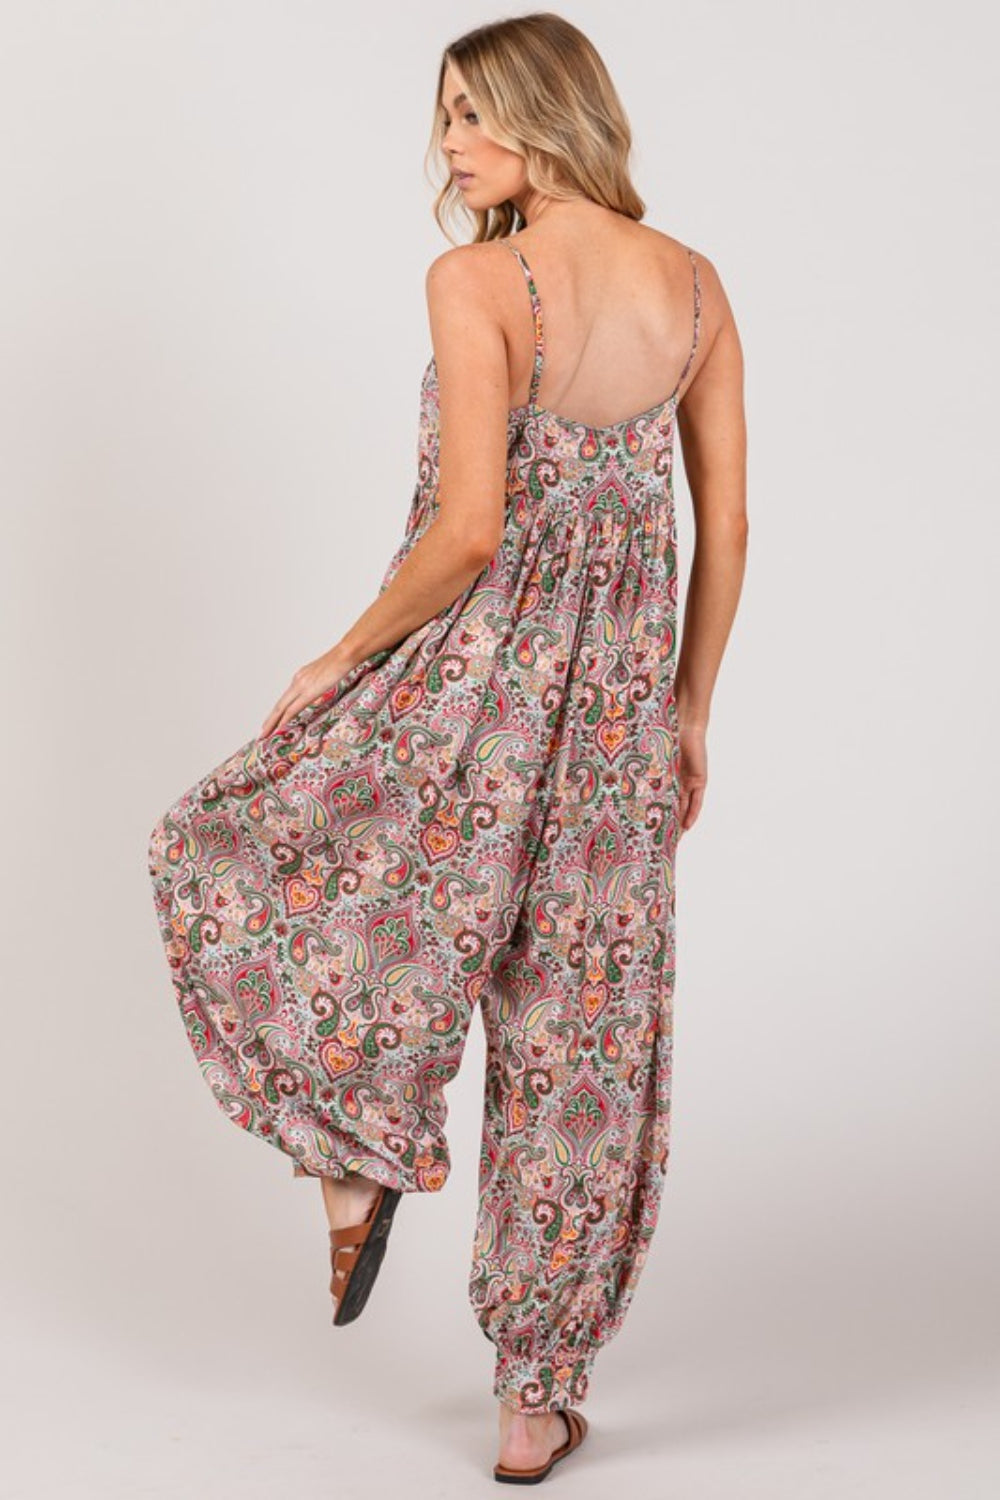 The Multi Paisley Print Sleeveless Jumpsuit is a chic and versatile piece that exudes bohemian charm. The colorful paisley print adds a pop of vibrancy and energy to the jumpsuit, making it a statement piece for any occasion. The sleeveless design and flowy silhouette offer a comfortable and flattering fit, perfect for warm weather or casual outings.  S-X